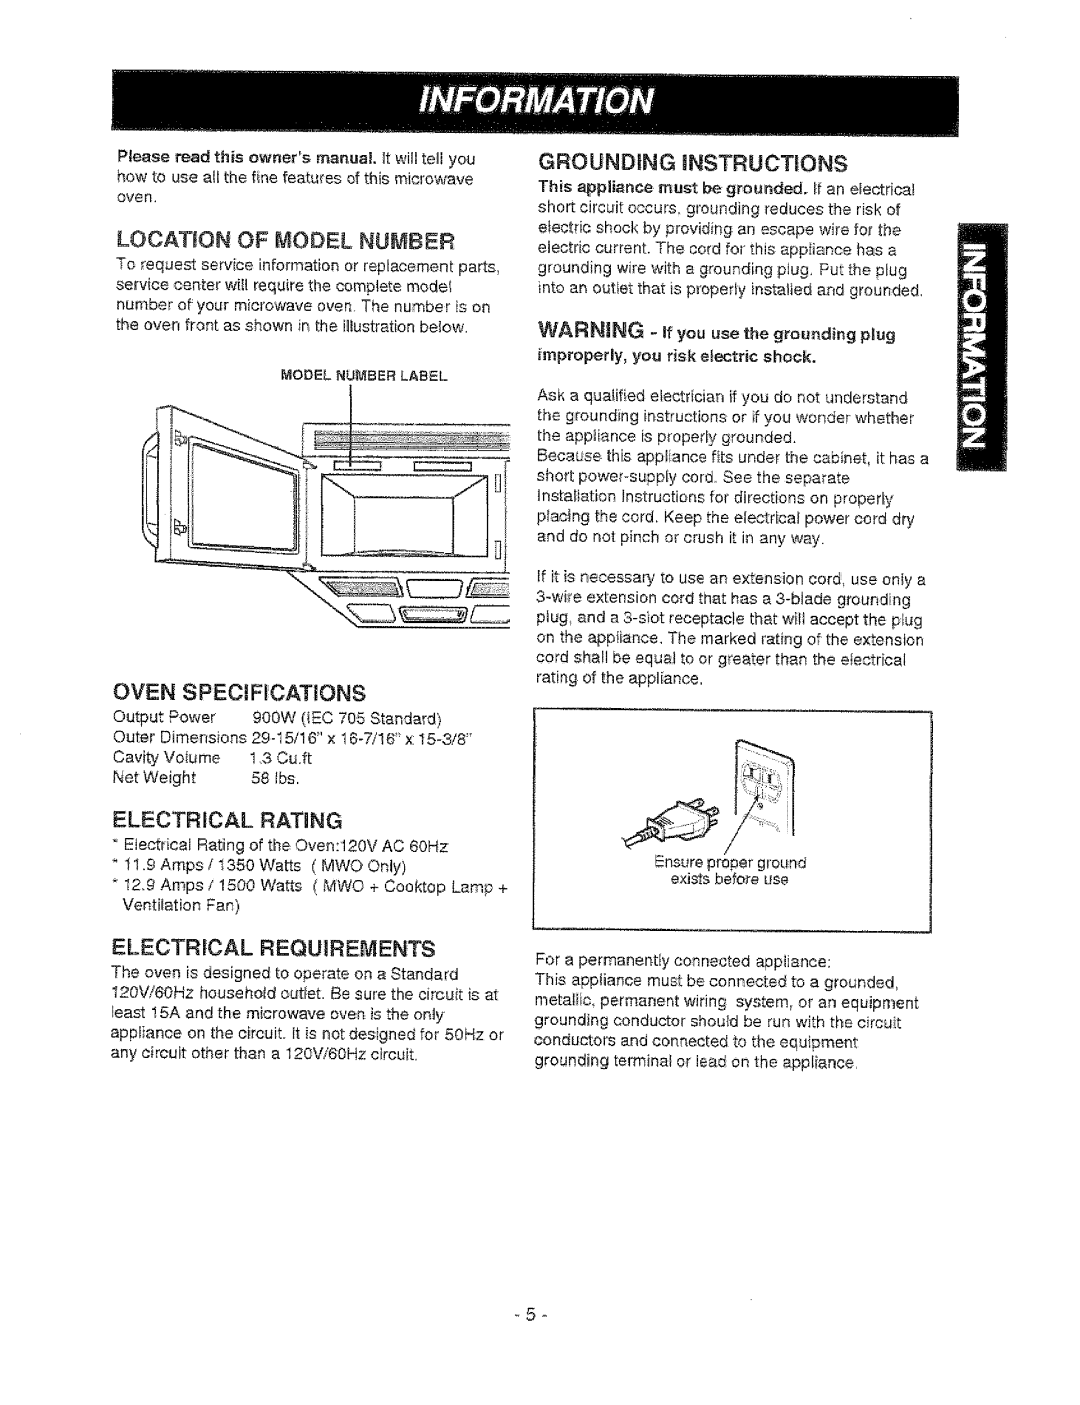 Sears 721.67602, 721.67601 Location Of Model Number, Oven Specifications, Grounding Instructions, Electrical Requirements 